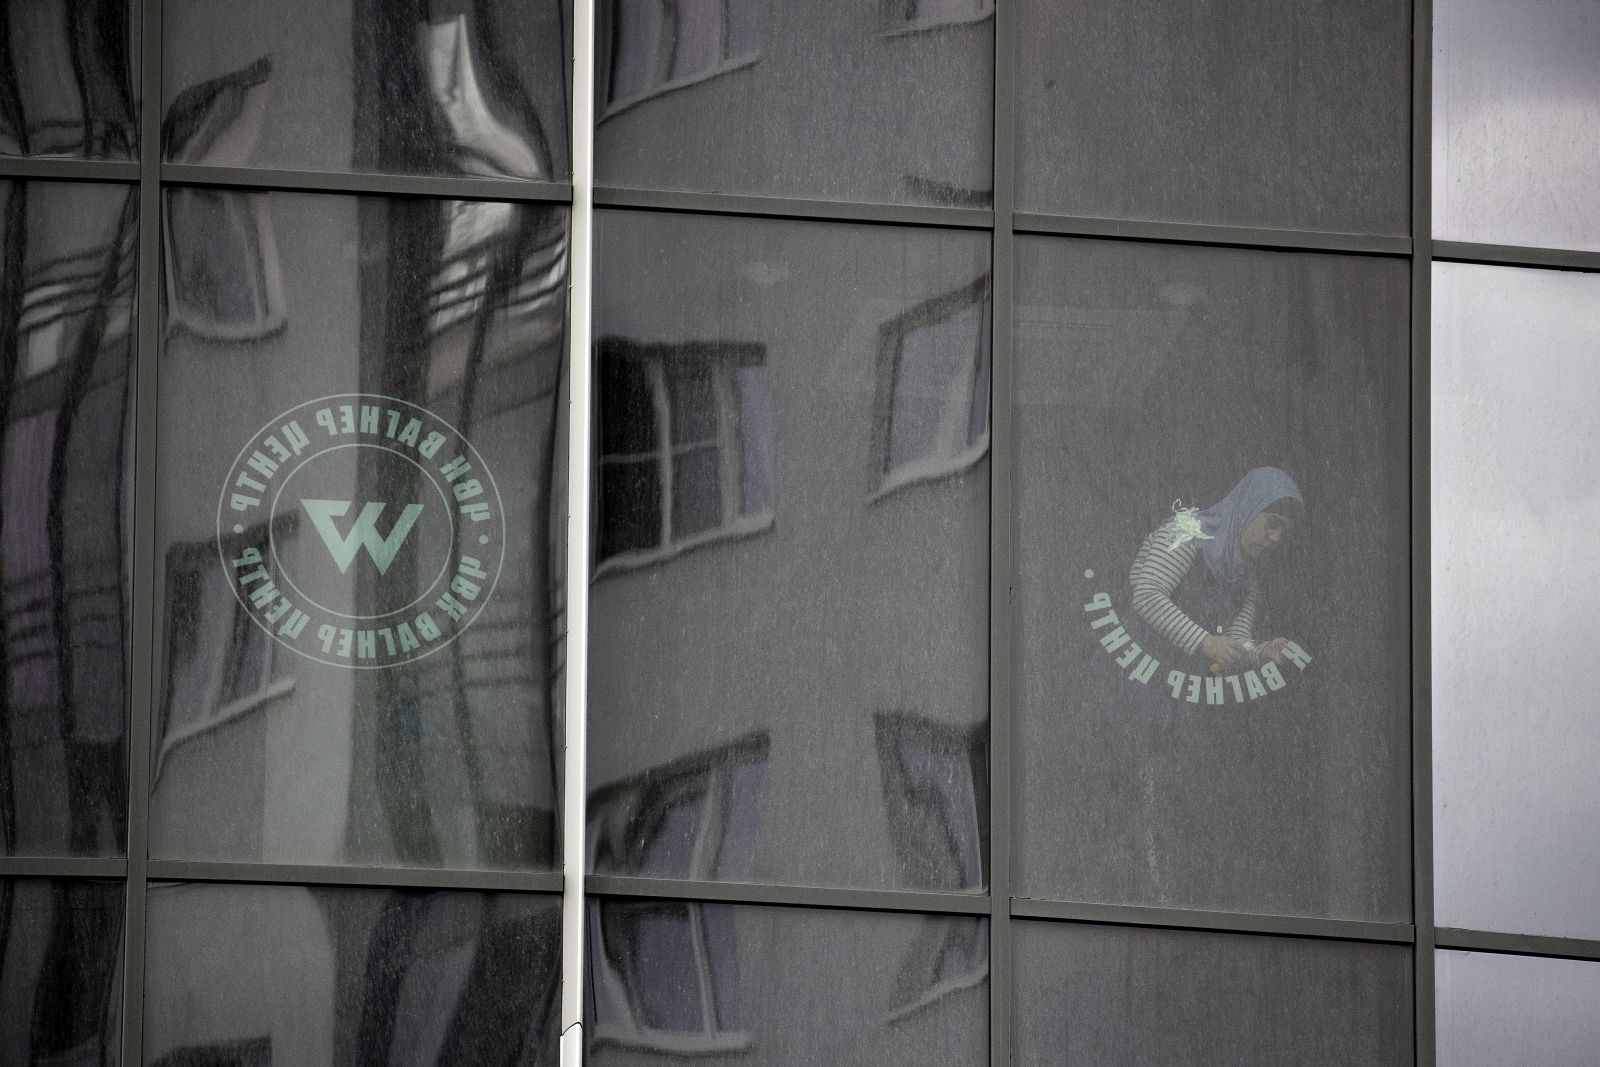 epa10722704 A worker removes the logo of the private military company (PMC) Wagner Group from the windows of the Sea Capital (Morskaya Stolitsa) business center, where Yevgeny Prigozhin's company rented several floors in St. Petersburg, Russia, 02 July 2023. On 23 June 2023, Wagner Group forces led by Prigozhin left the frontline in Ukraine and staged an 'armed mutiny' against Russia's military leadership. Prigozhin claimed on 24 June 2023 that his troops had occupied the headquarters of the Southern Military District in Rostov-on-Don, Russia, a key city near the Ukrainian border. A deal negotiated by the Belarusian president with Prigozhin stopped the Wagner forces' movement toward Moscow and ended the standoff, with Prigozhin and his fighters leaving the country.  EPA/ANATOLY MALTSEV